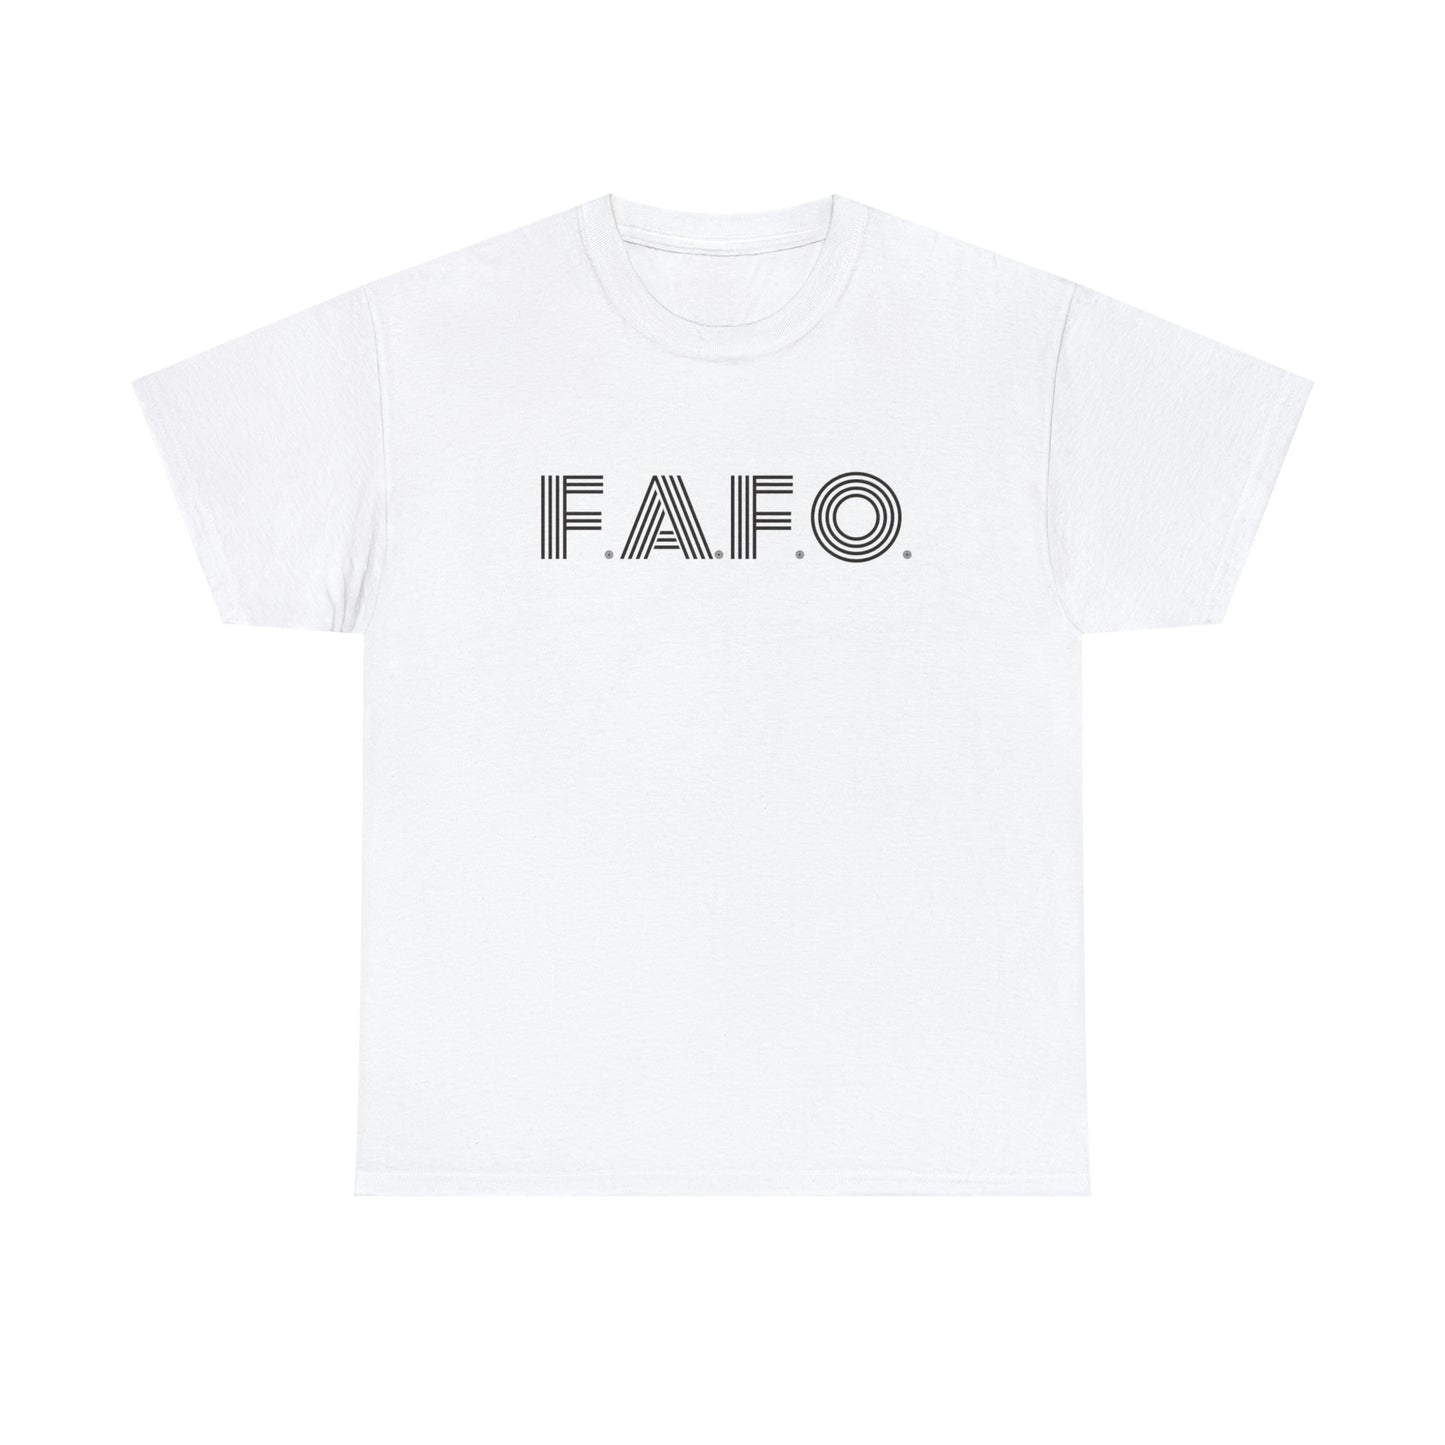 FAFO T-Shirt For Conservative TShirt Patriotic Shirt Freedom T Shirt For Conservative Gift Fuck Around And Find Out Shirt Conservative Gift